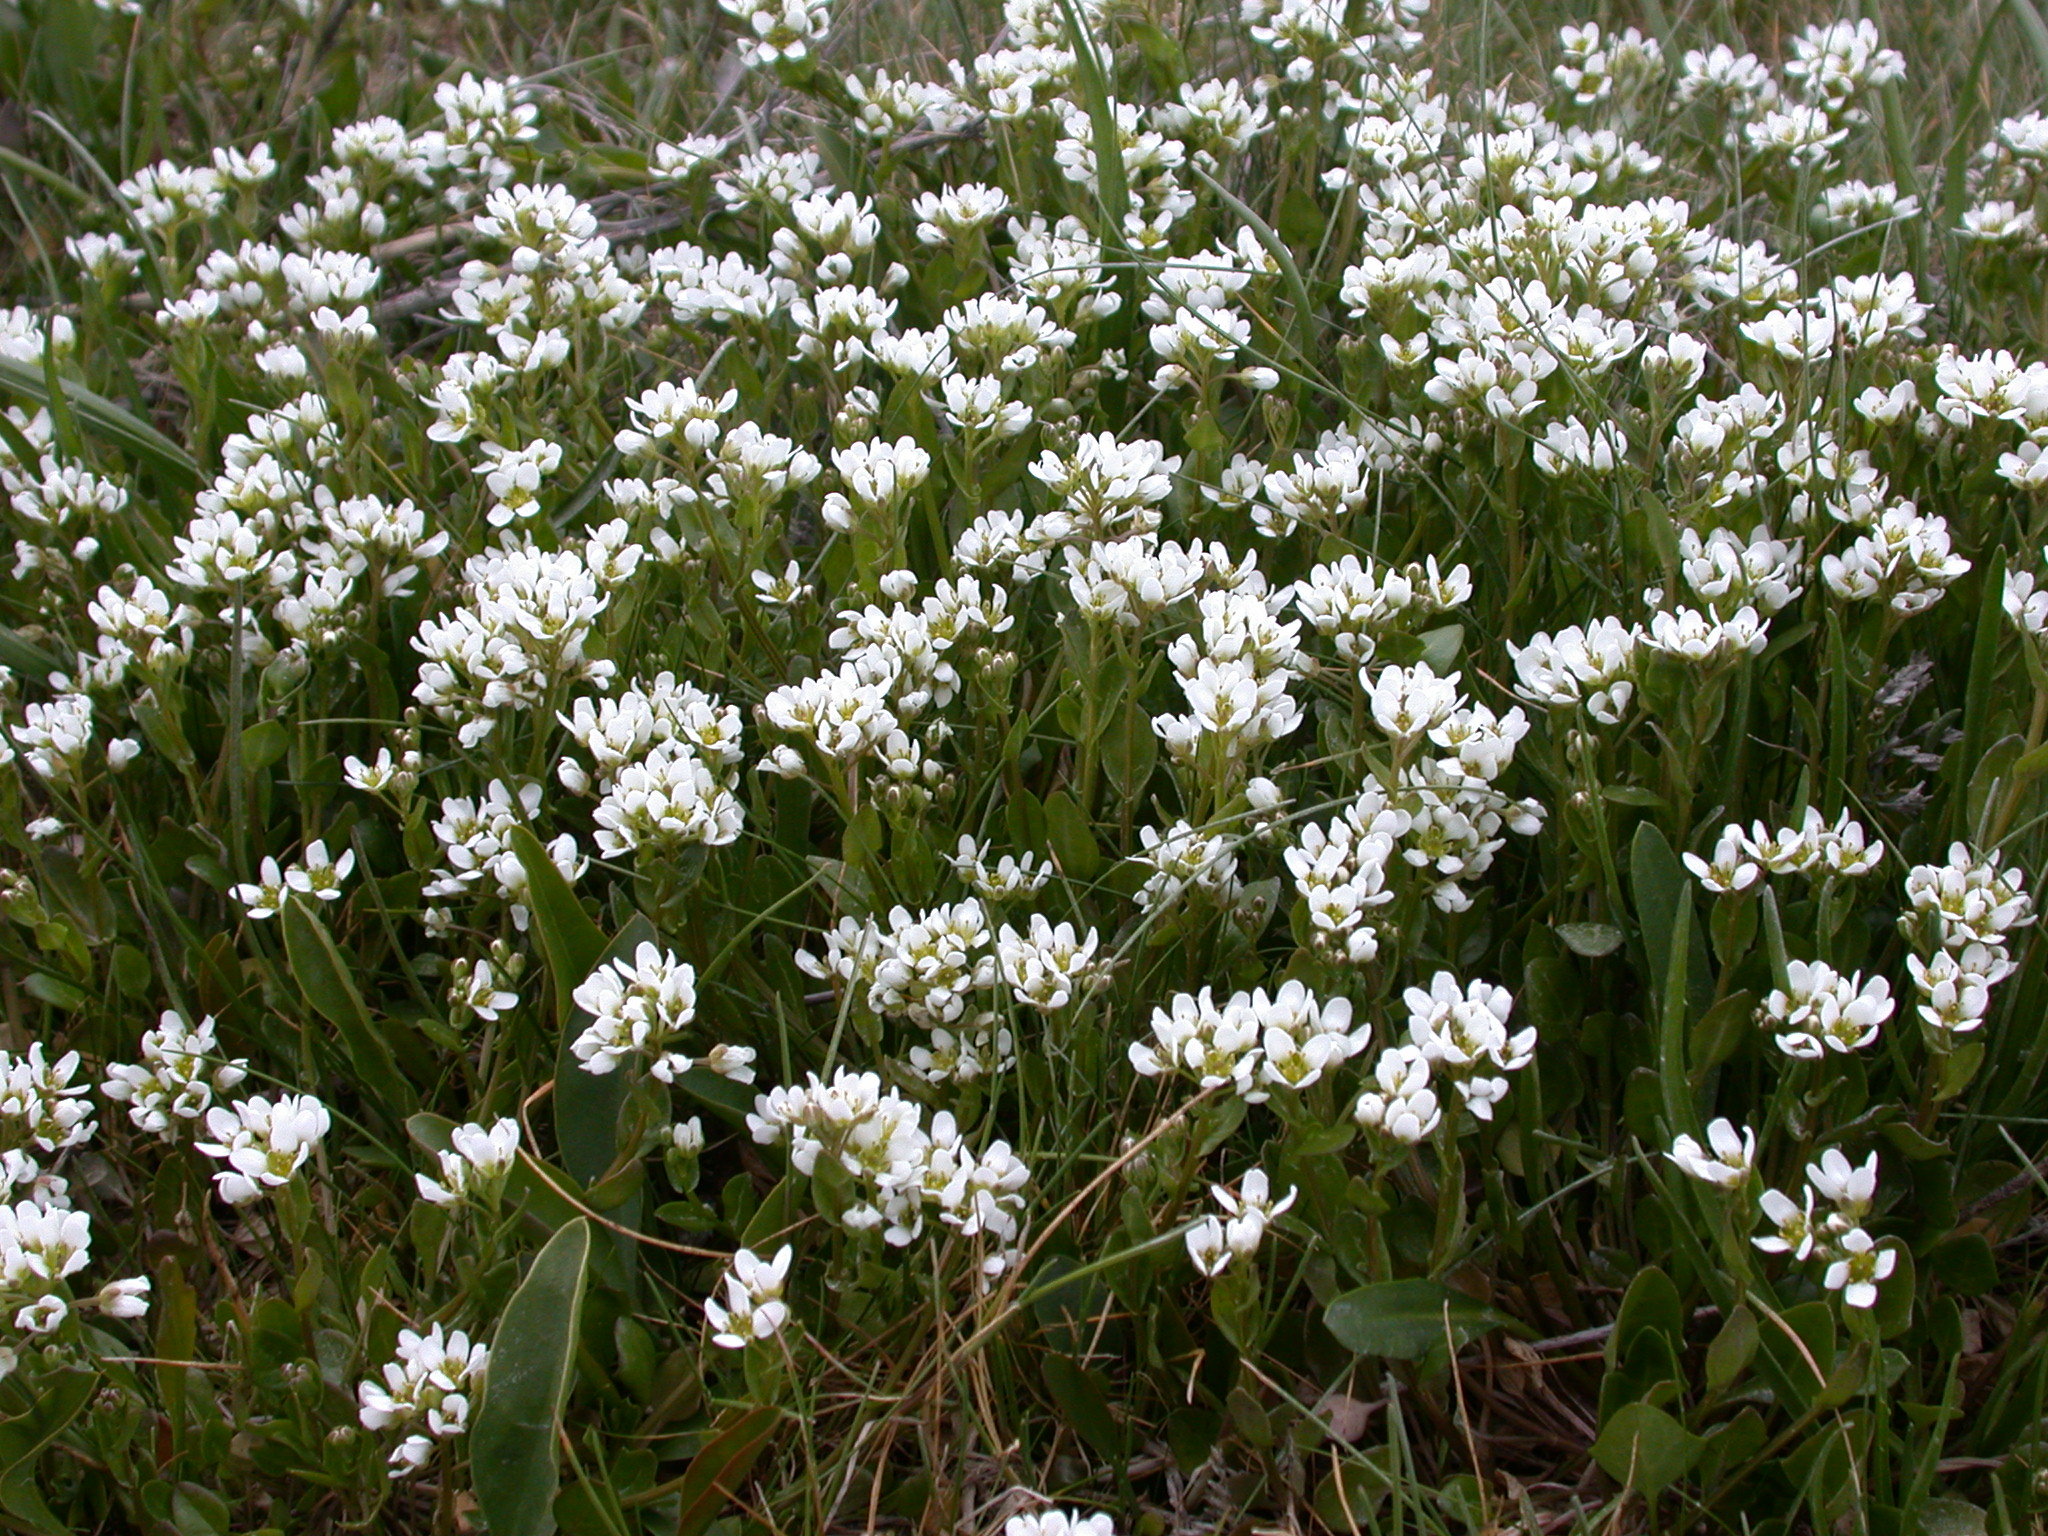 Cochlearia anglica (rights holder: Olivier Pichard)